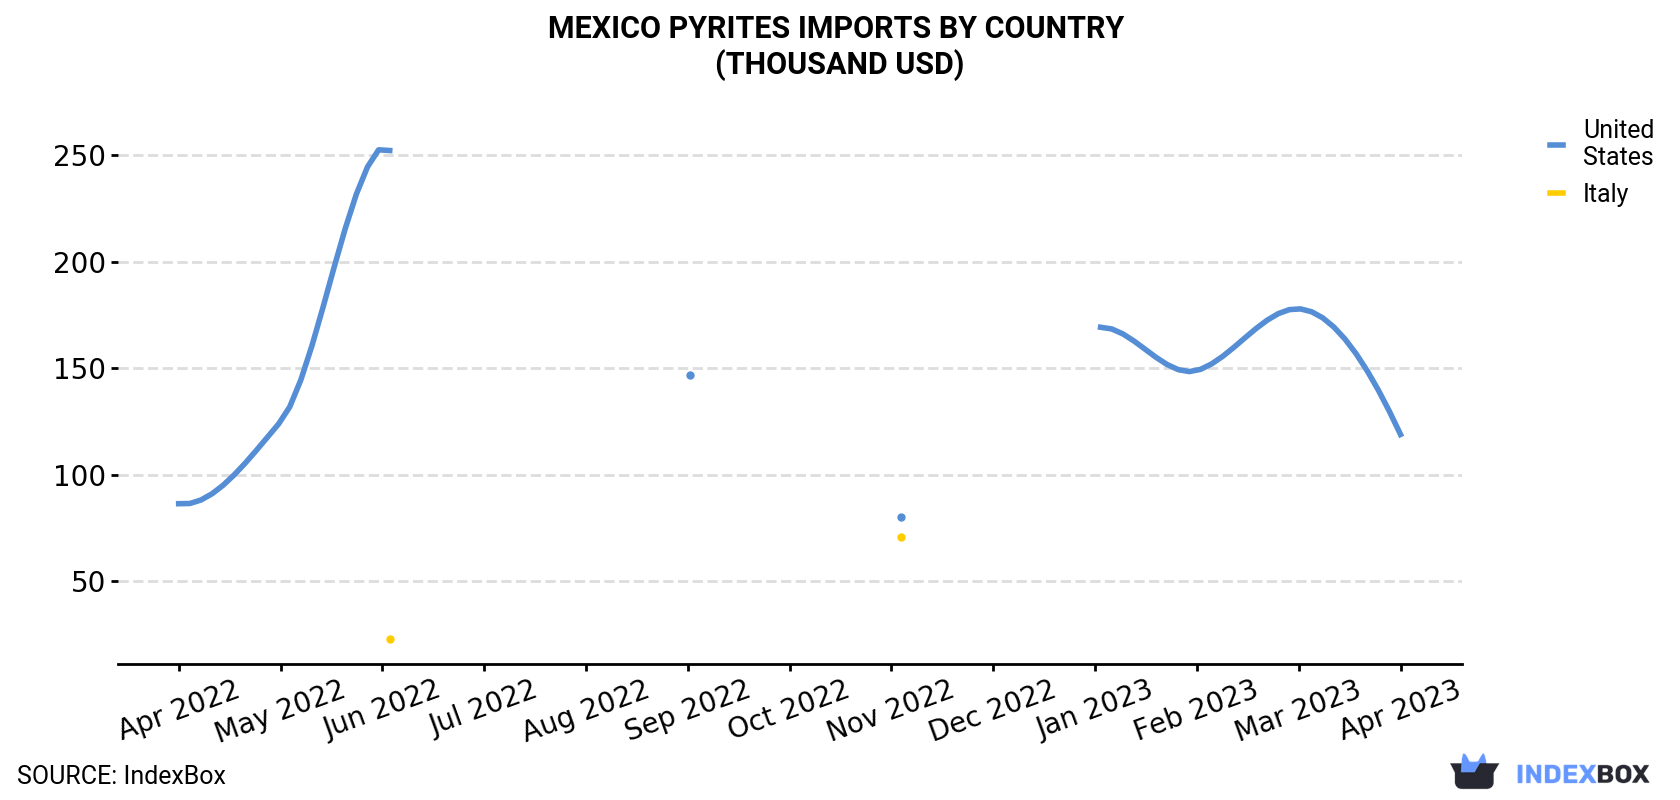 Mexico Pyrites Imports By Country (Thousand USD)